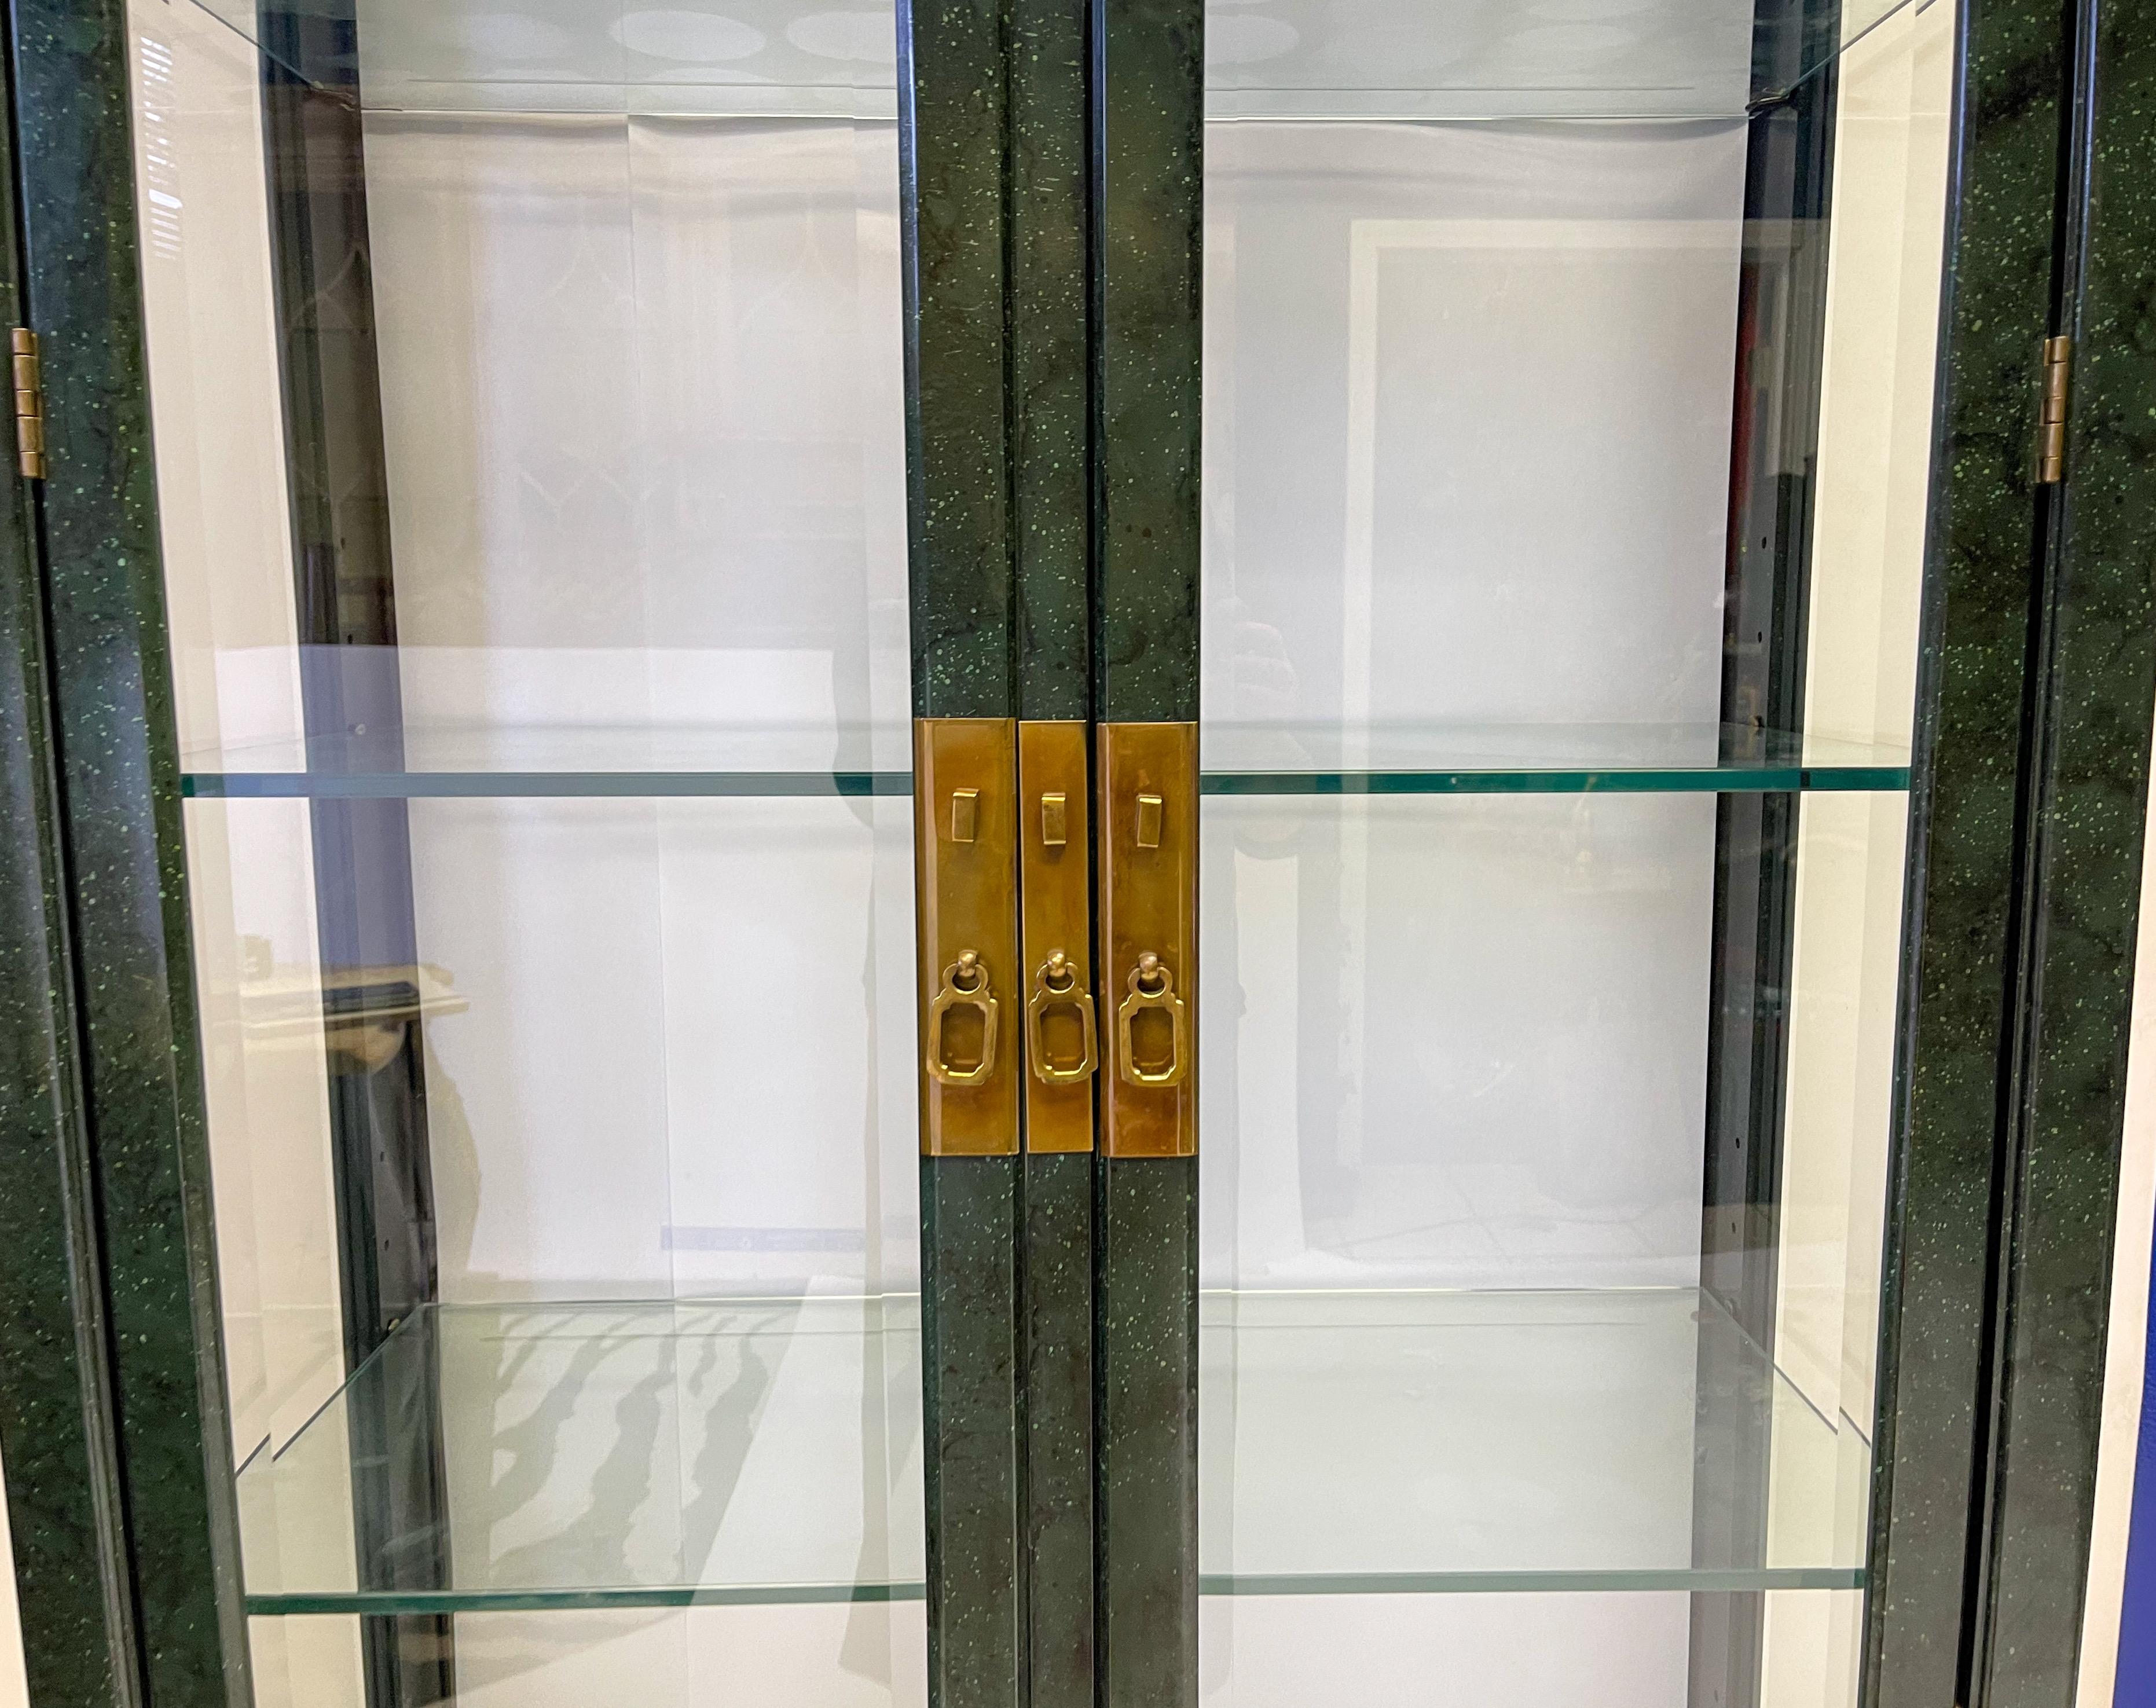 This is a wonderful pair of mirrored Asian style cabinets by Henredon. The green faux malachite finish is original. The backs are mirrored and shelves are adjustable. The pieces are electrified. They are in very good condition.